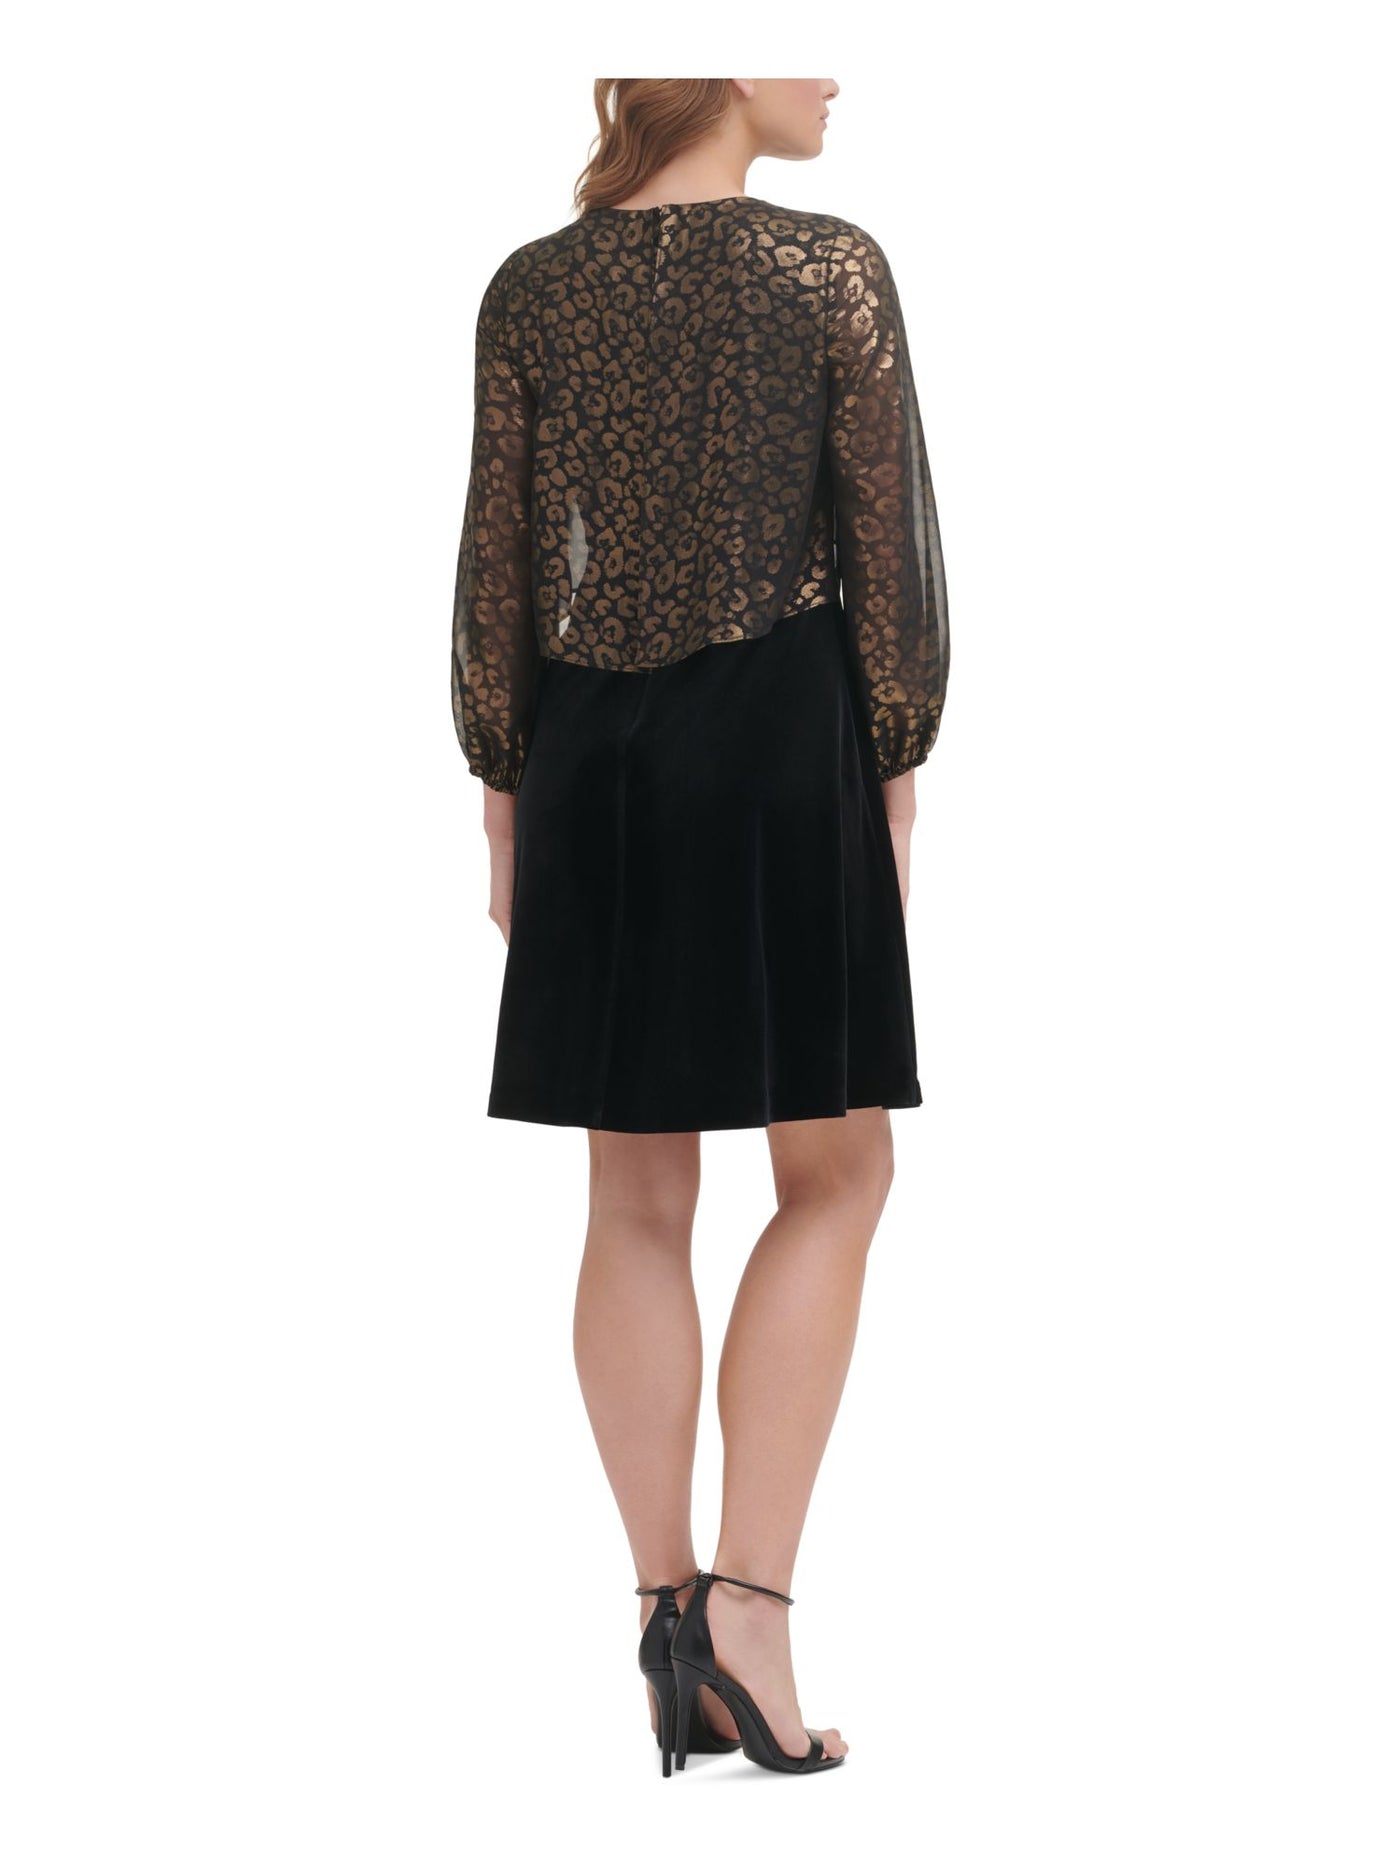 DKNY Womens Black Zippered Leopard Print Popover And Sleeve Jewel Neck Above The Knee Wear To Work Fit + Flare Dress 16